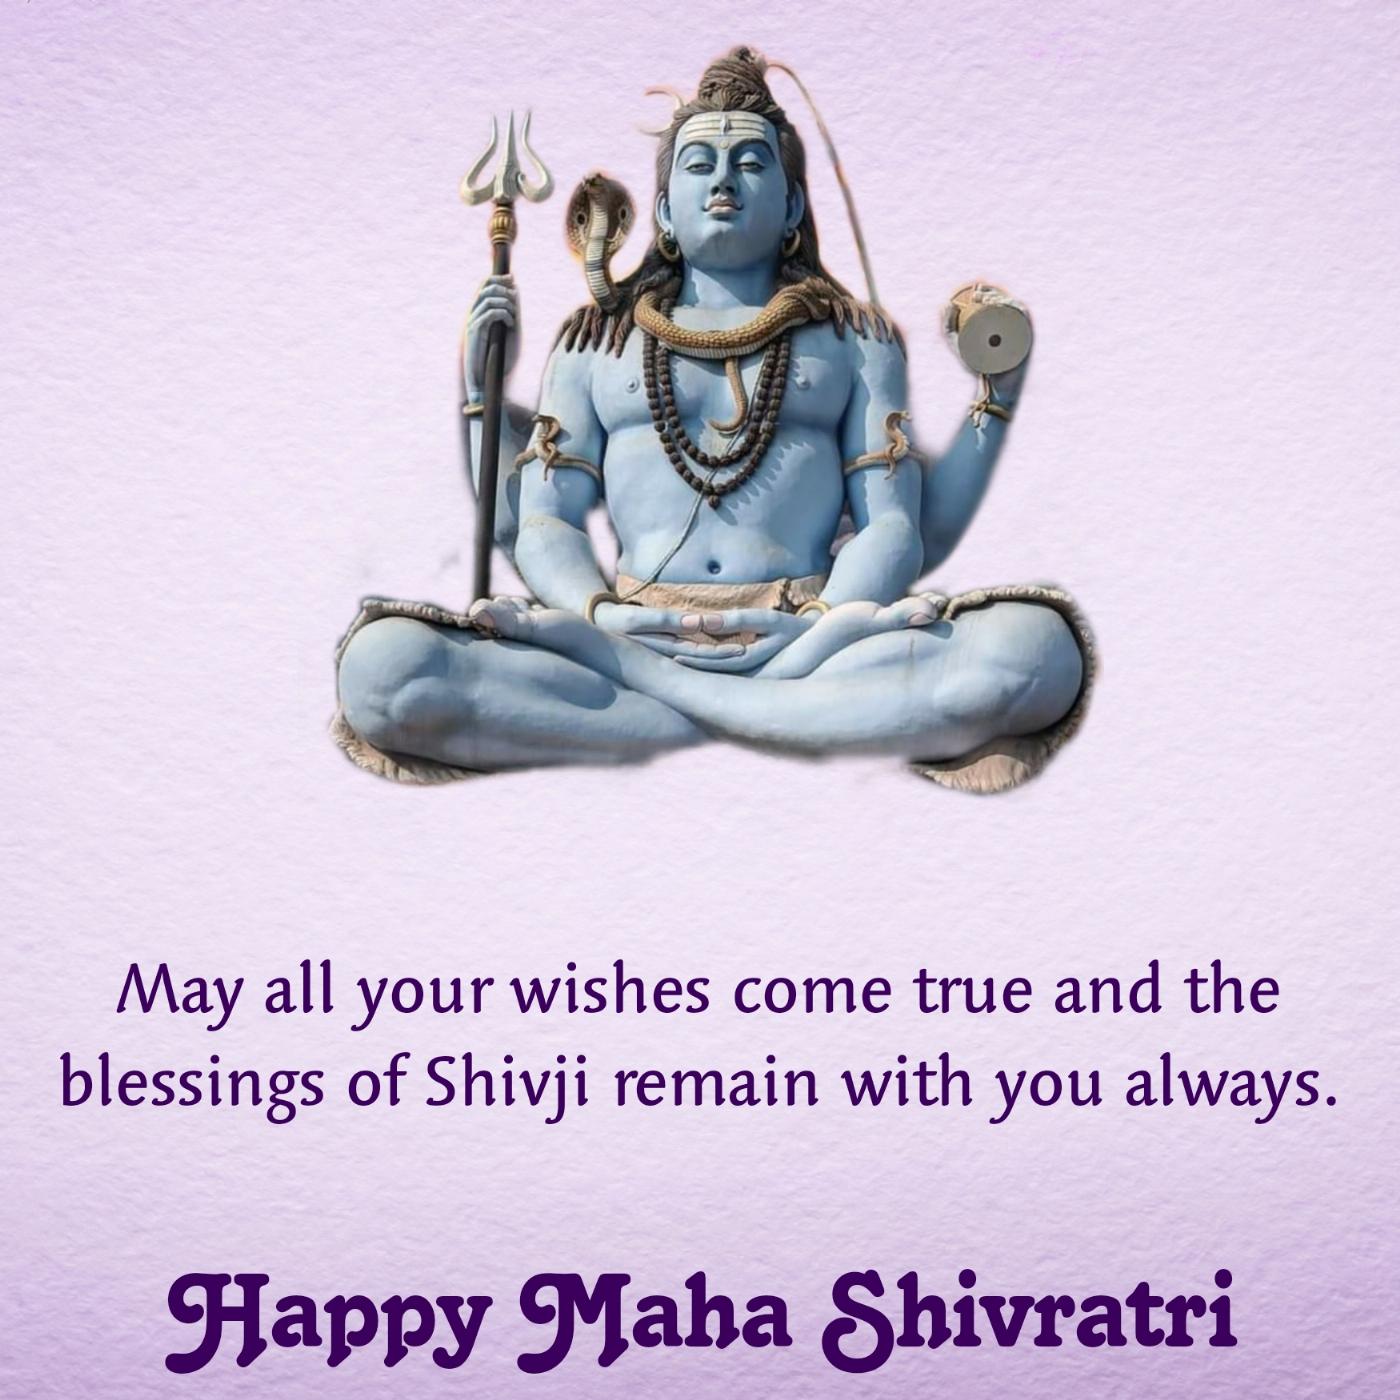 May all your wishes come true and the blessings of Shivji remain with you always